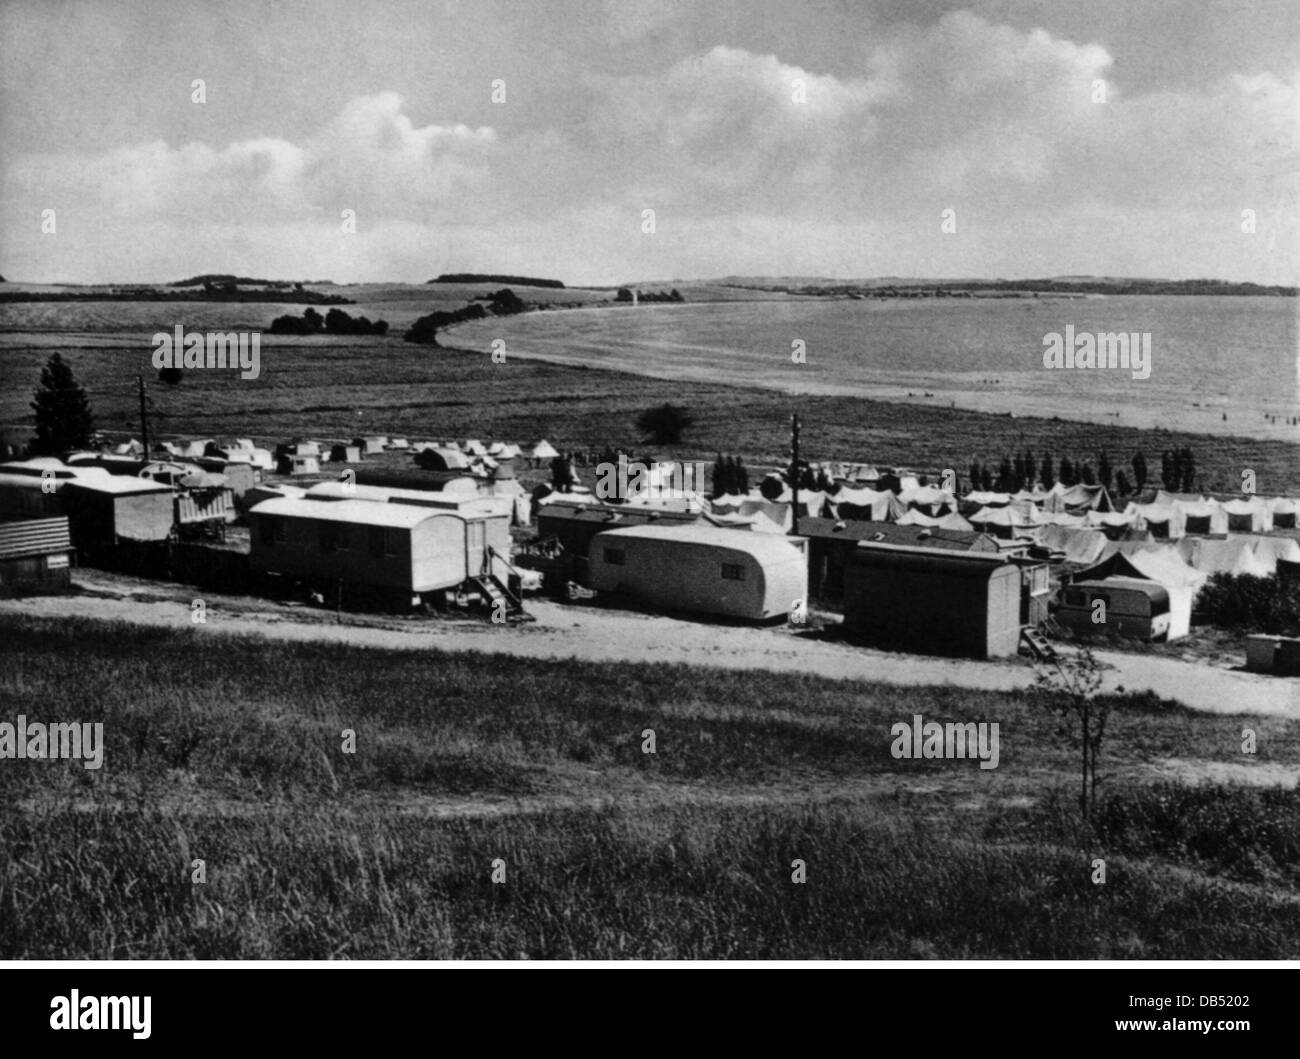 1970s campsite Black and White Stock Photos & Images - Alamy